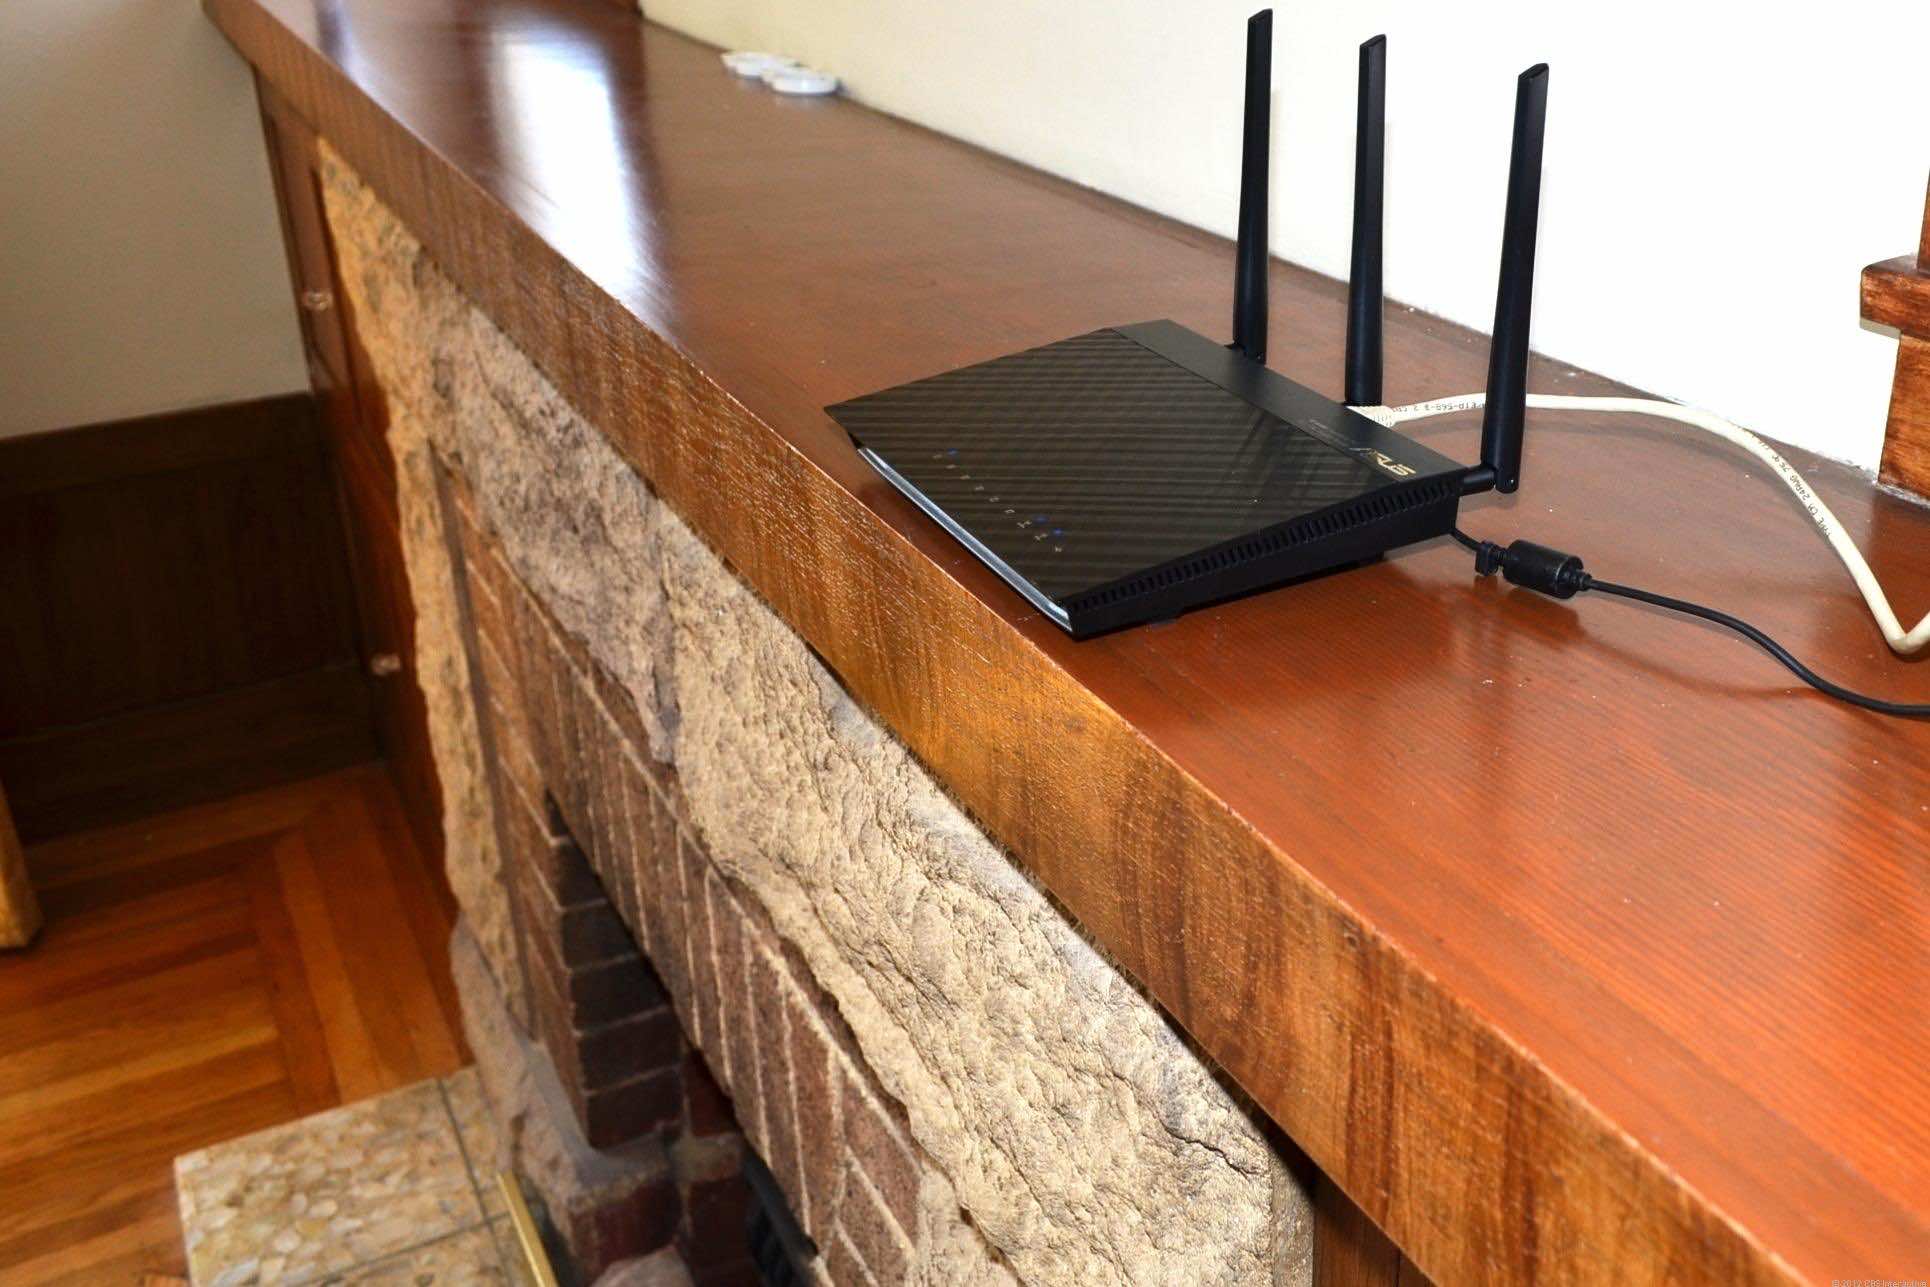 Router Not Making It To Living Room